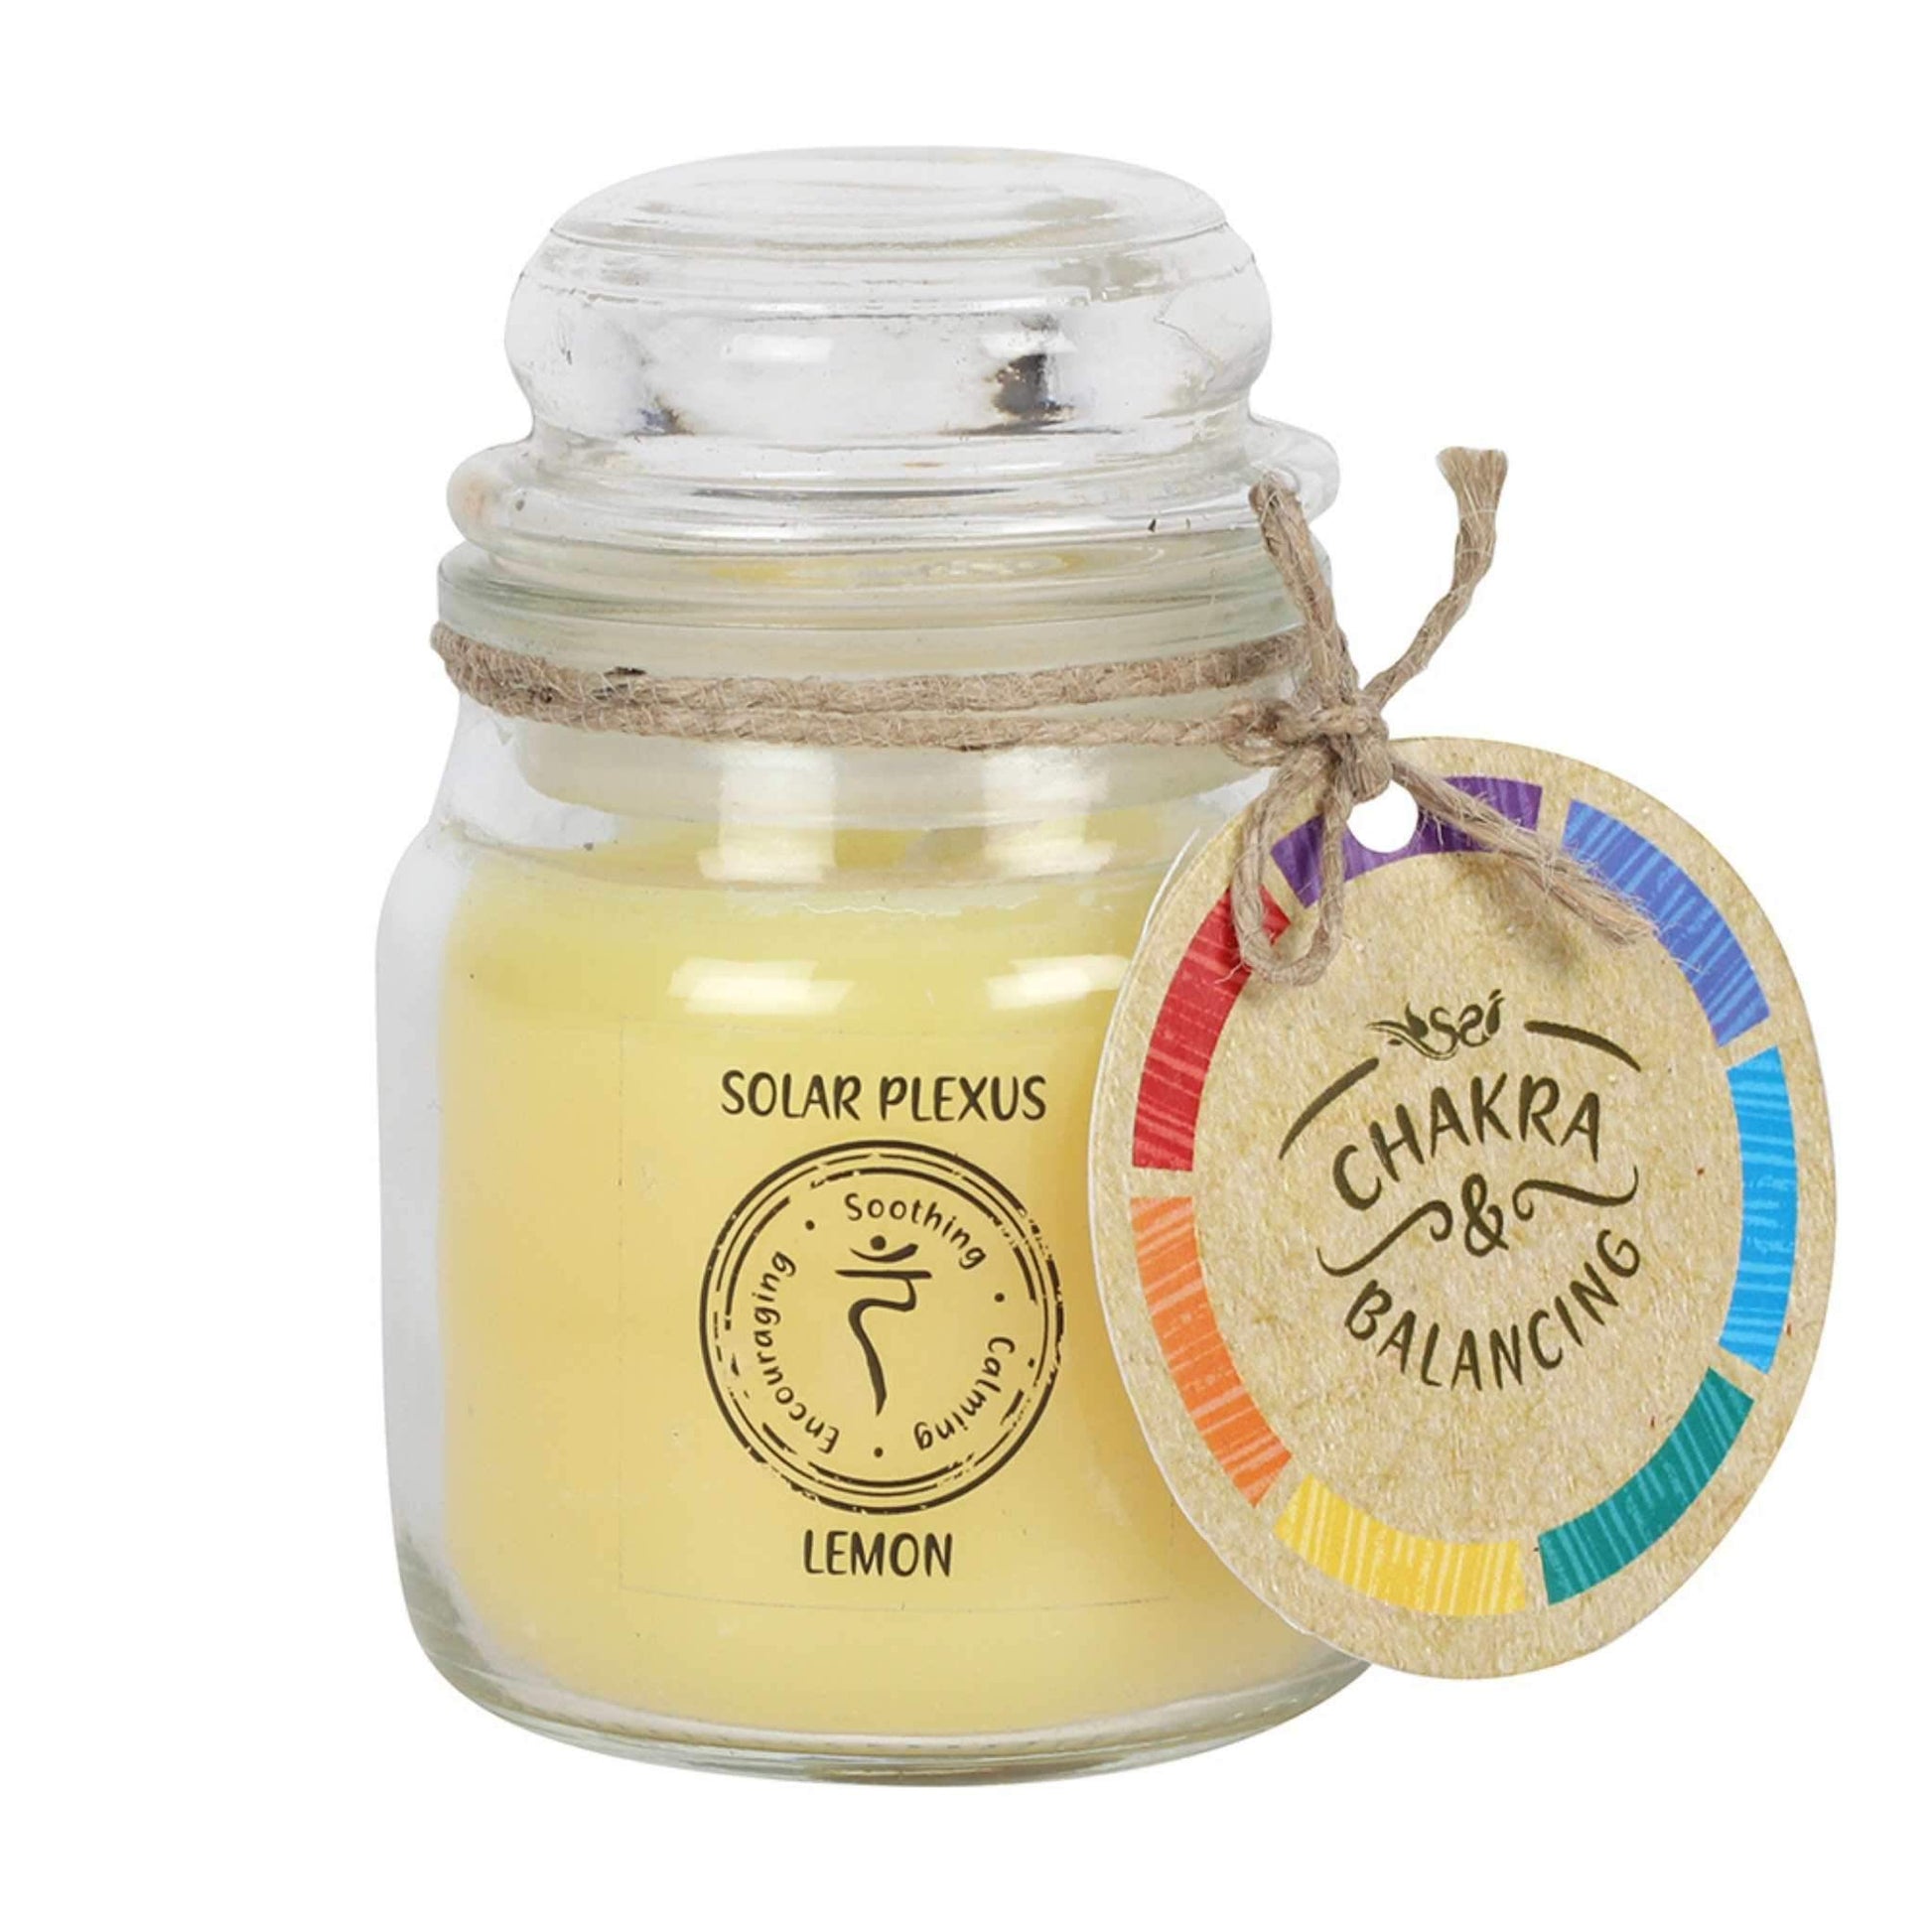 Balancing Chakra Candle in a min glass jar with stopper. Tied with a label that says Chakra Balancing. Candle iscream with a label on the jar that says Solar Plexus - Lemon